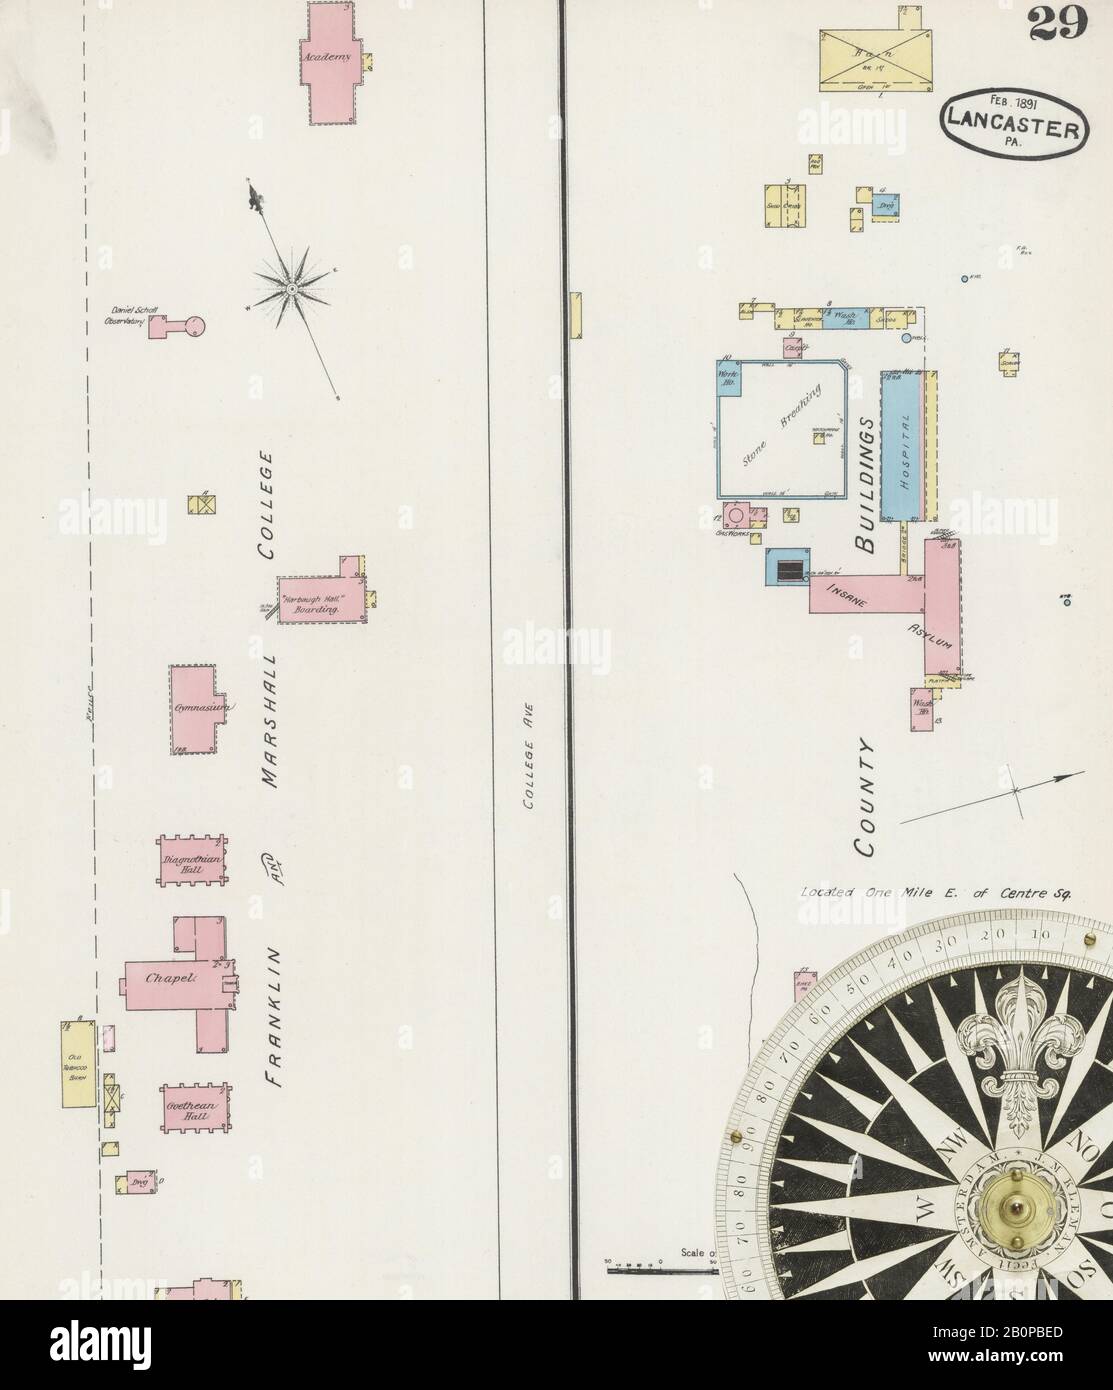 Image 29 of Sanborn Fire Insurance Map from Lancaster, Lancaster County, Pennsylvania. Feb 1891. 34 Sheet(s). Includes Quarryville, Mountville, West Willow Station, America, street map with a Nineteenth Century compass Stock Photo